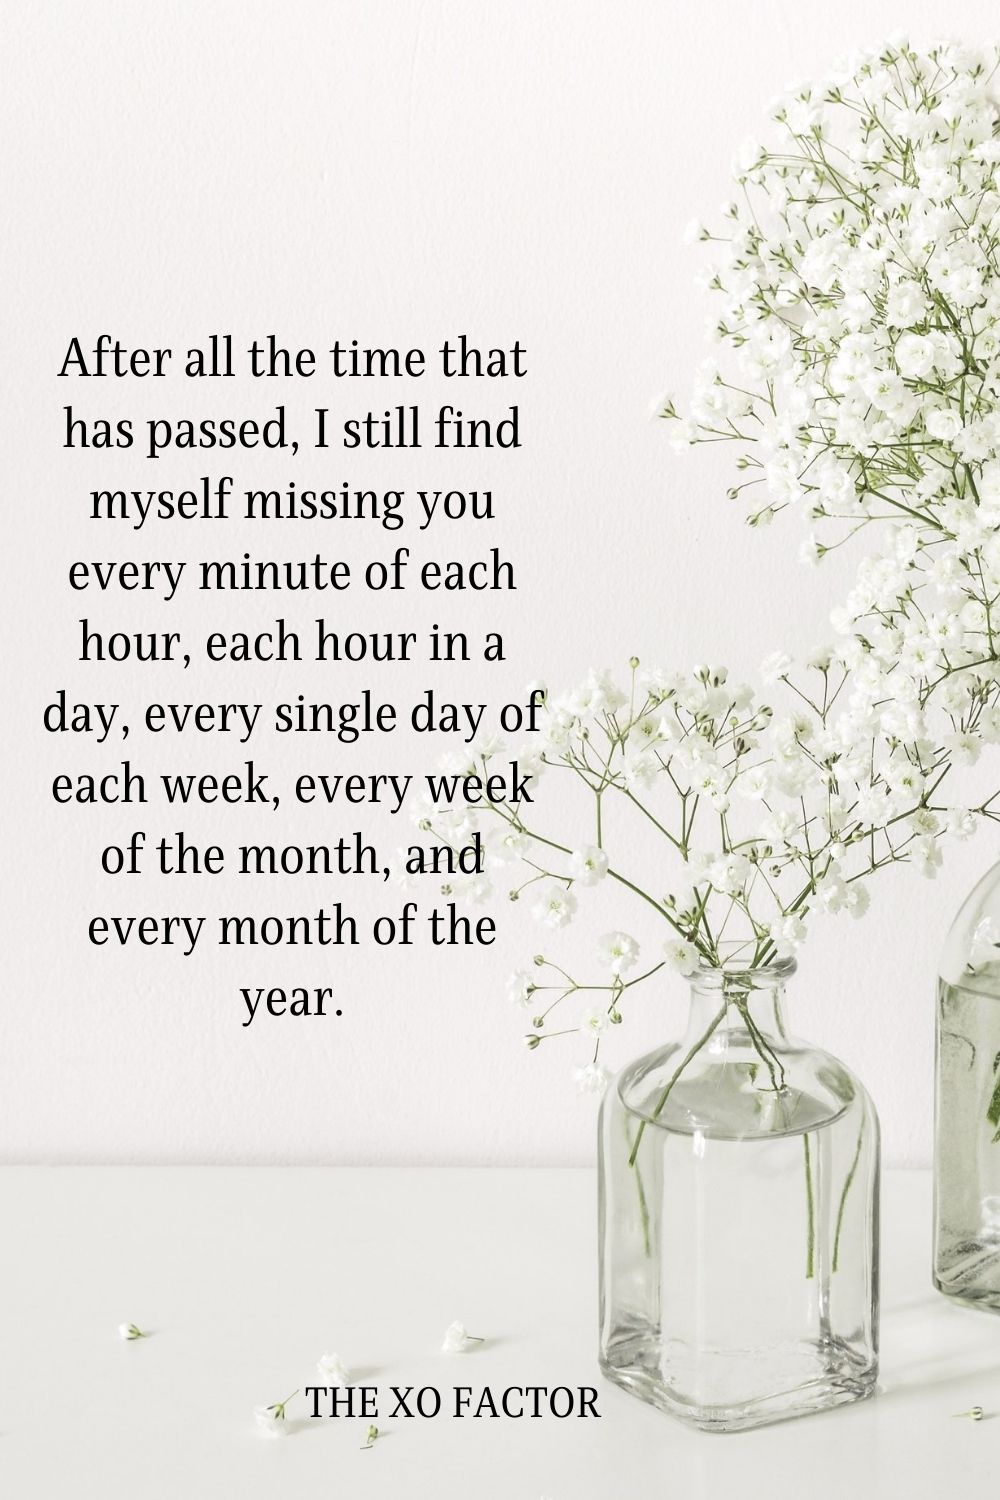 After all the time that has passed, I still find myself missing you every minute of each hour, each hour in a day, every single day of each week, every week of the month, and every month of the year.